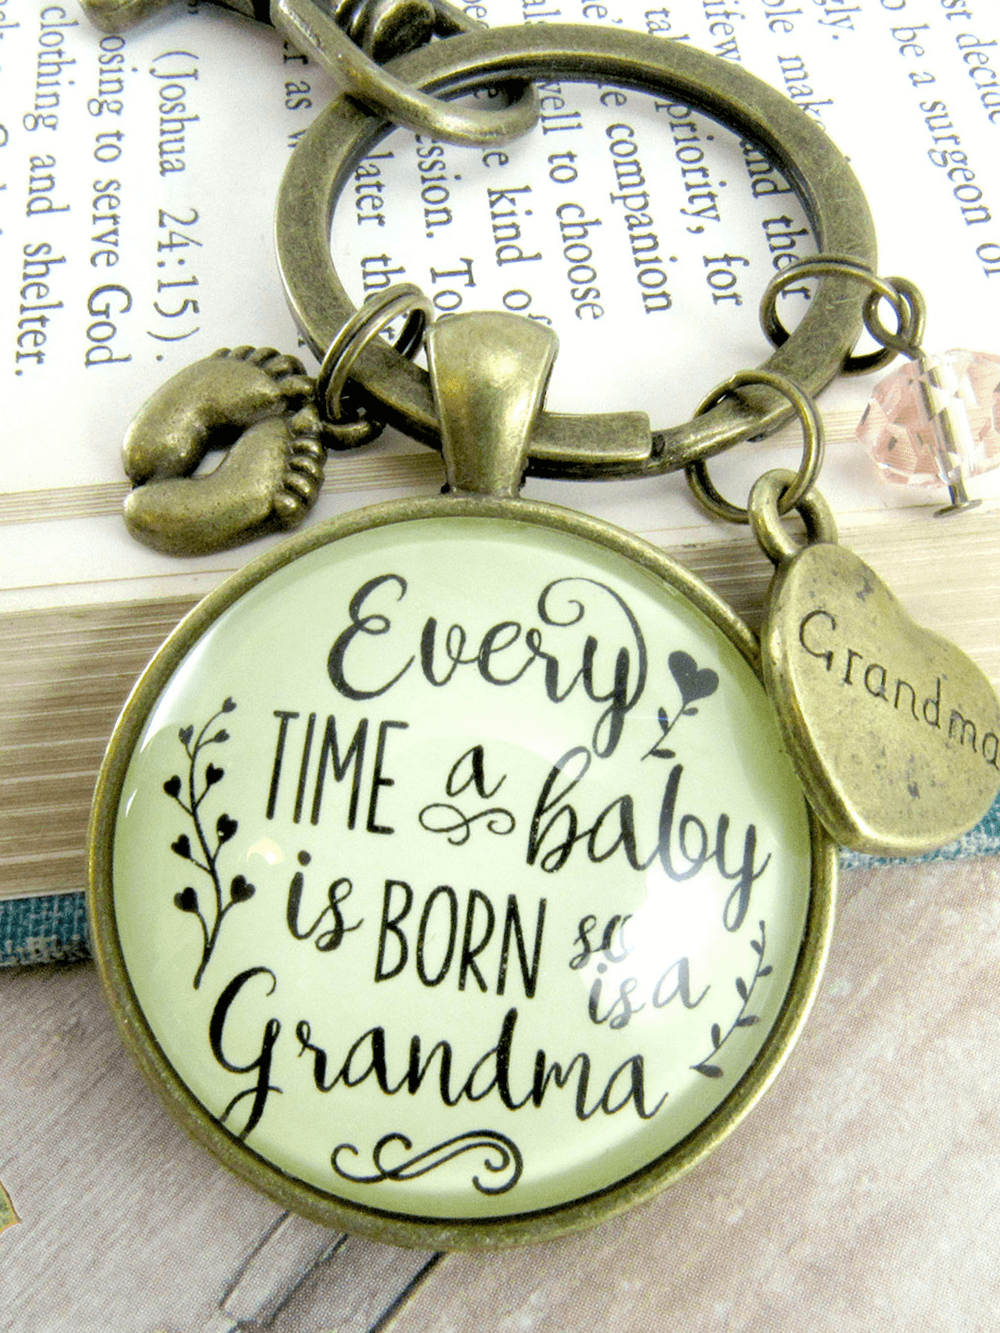 Gutsy Goodness Baby Gender Reveal Keychain Every Time Born So Is Grandma Pregnancy Boy Announcement Gift Blue